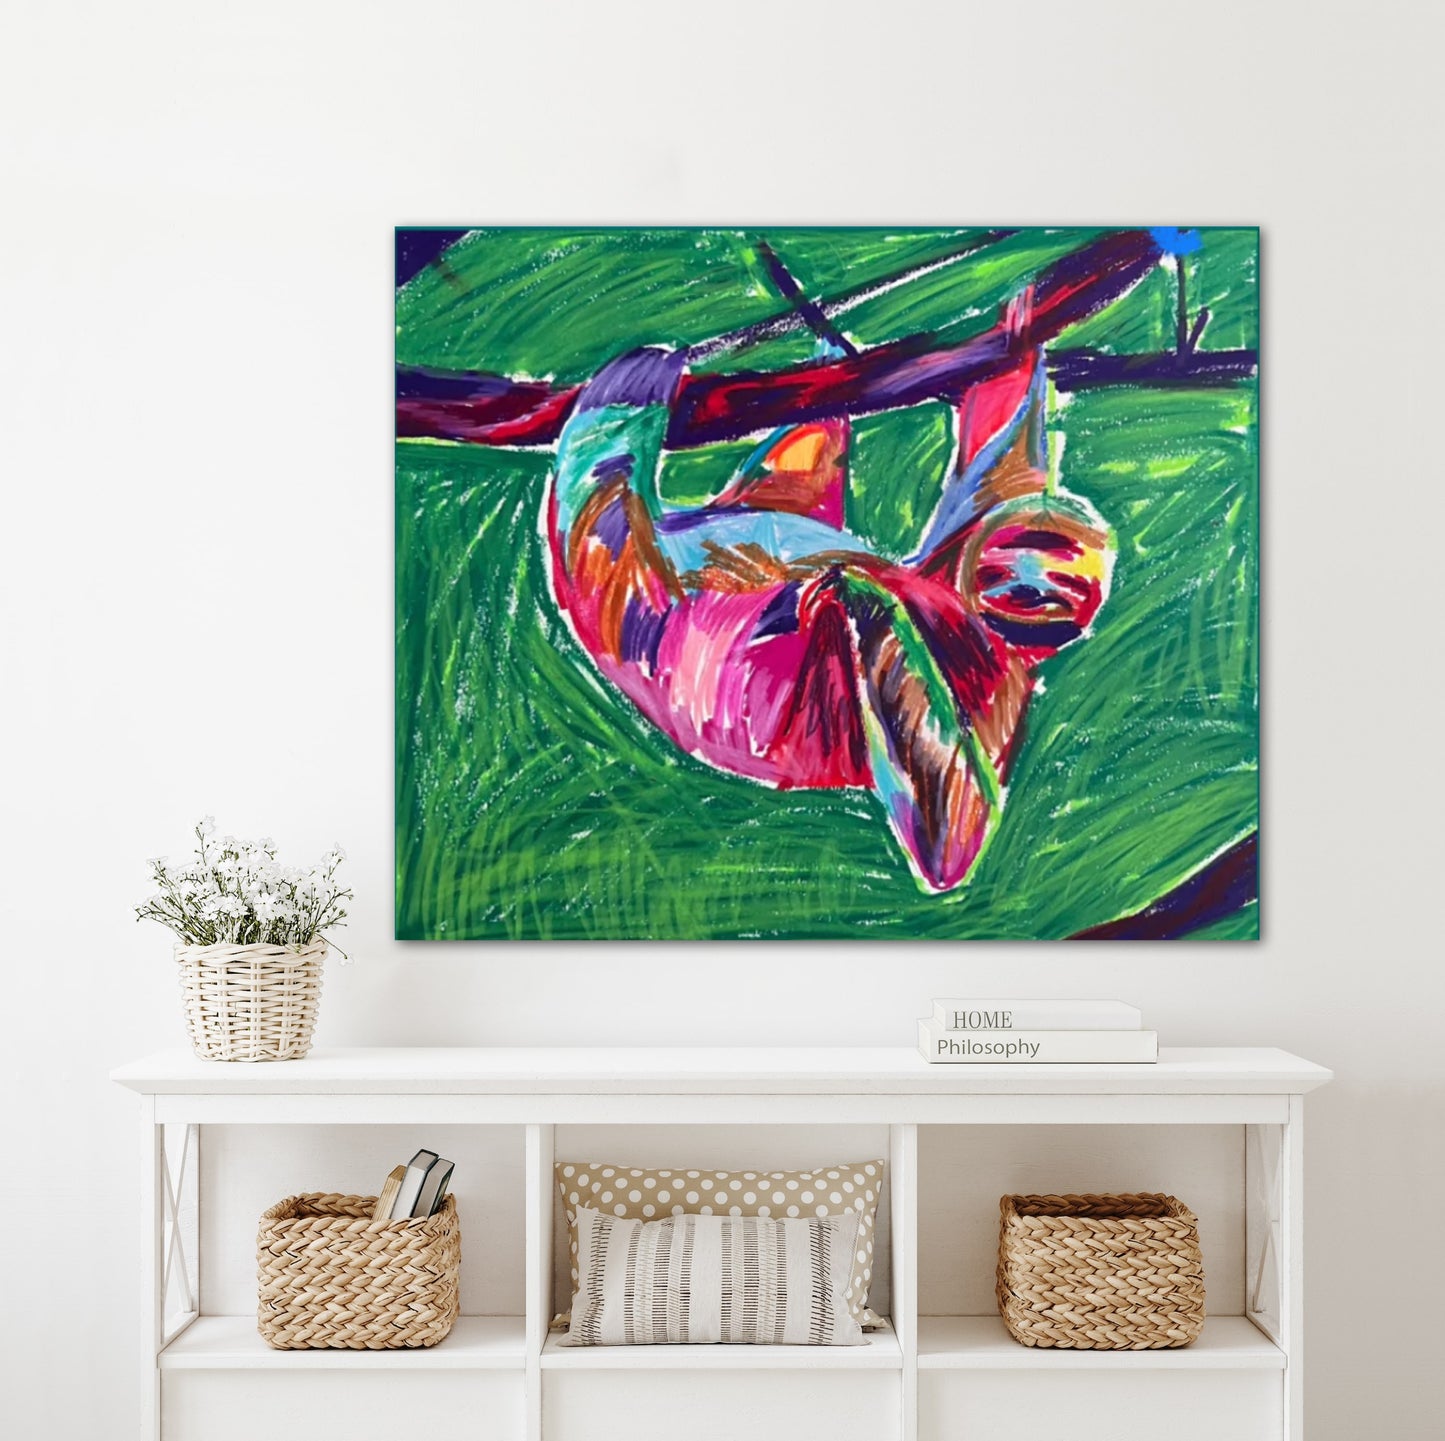 The Sloth - Print, Poster or Stretched Canvas Print in more sizes